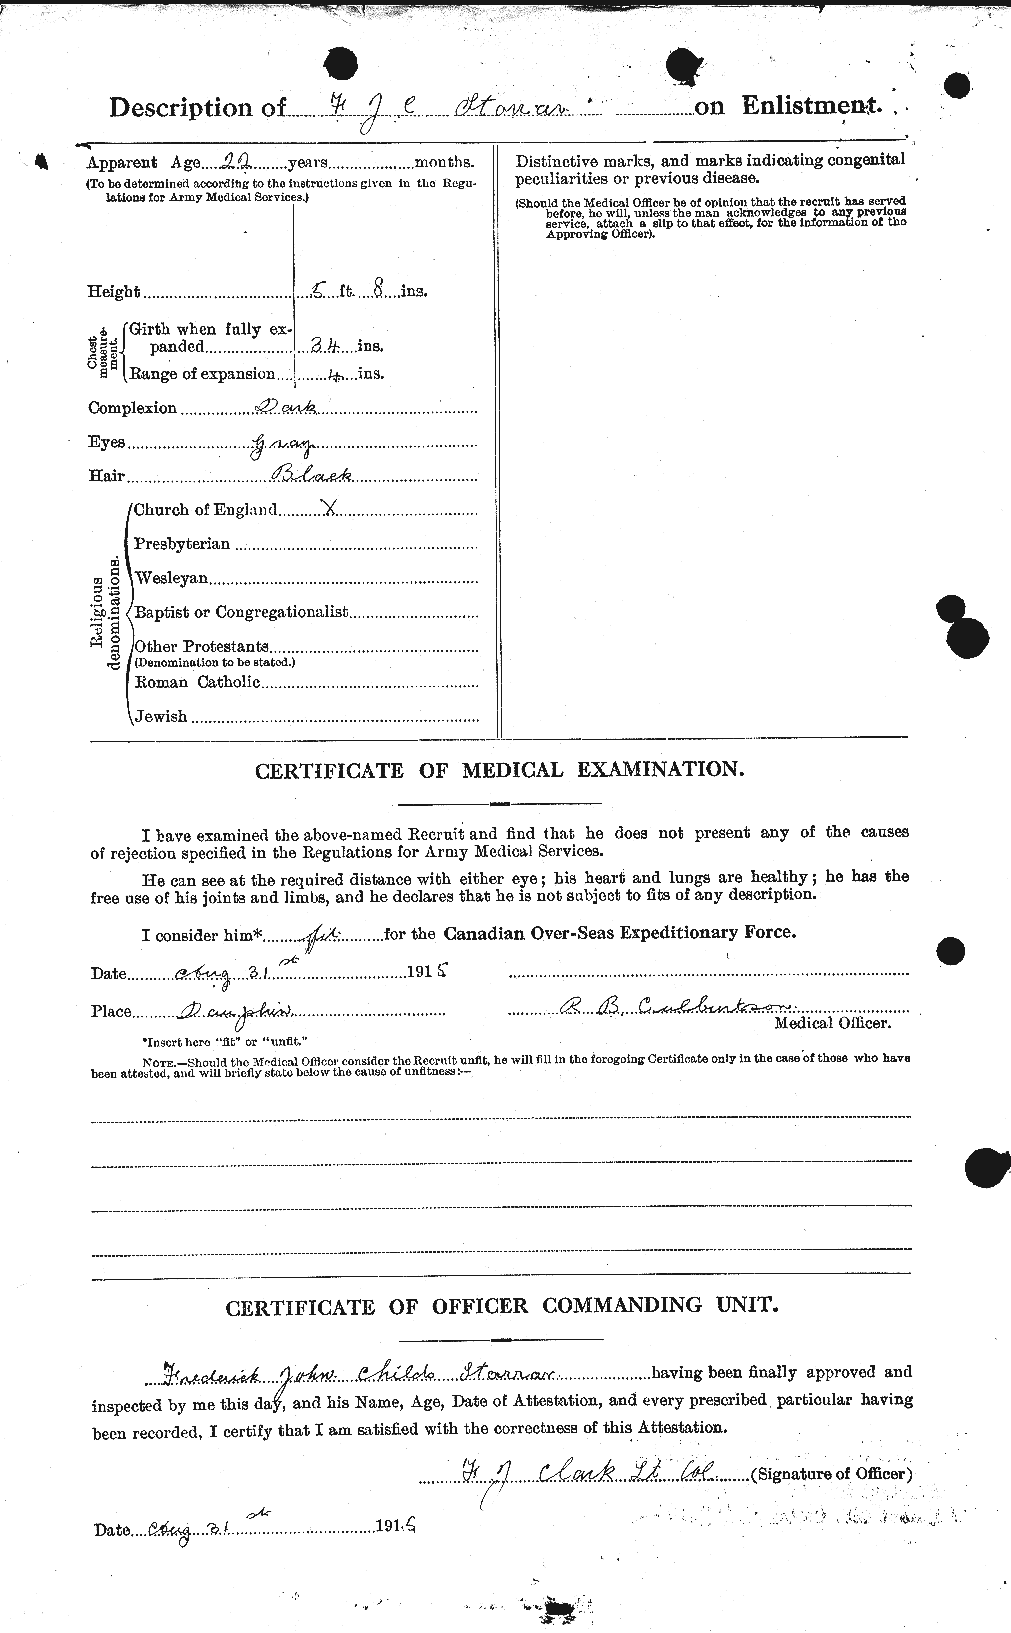 Personnel Records of the First World War - CEF 116420b